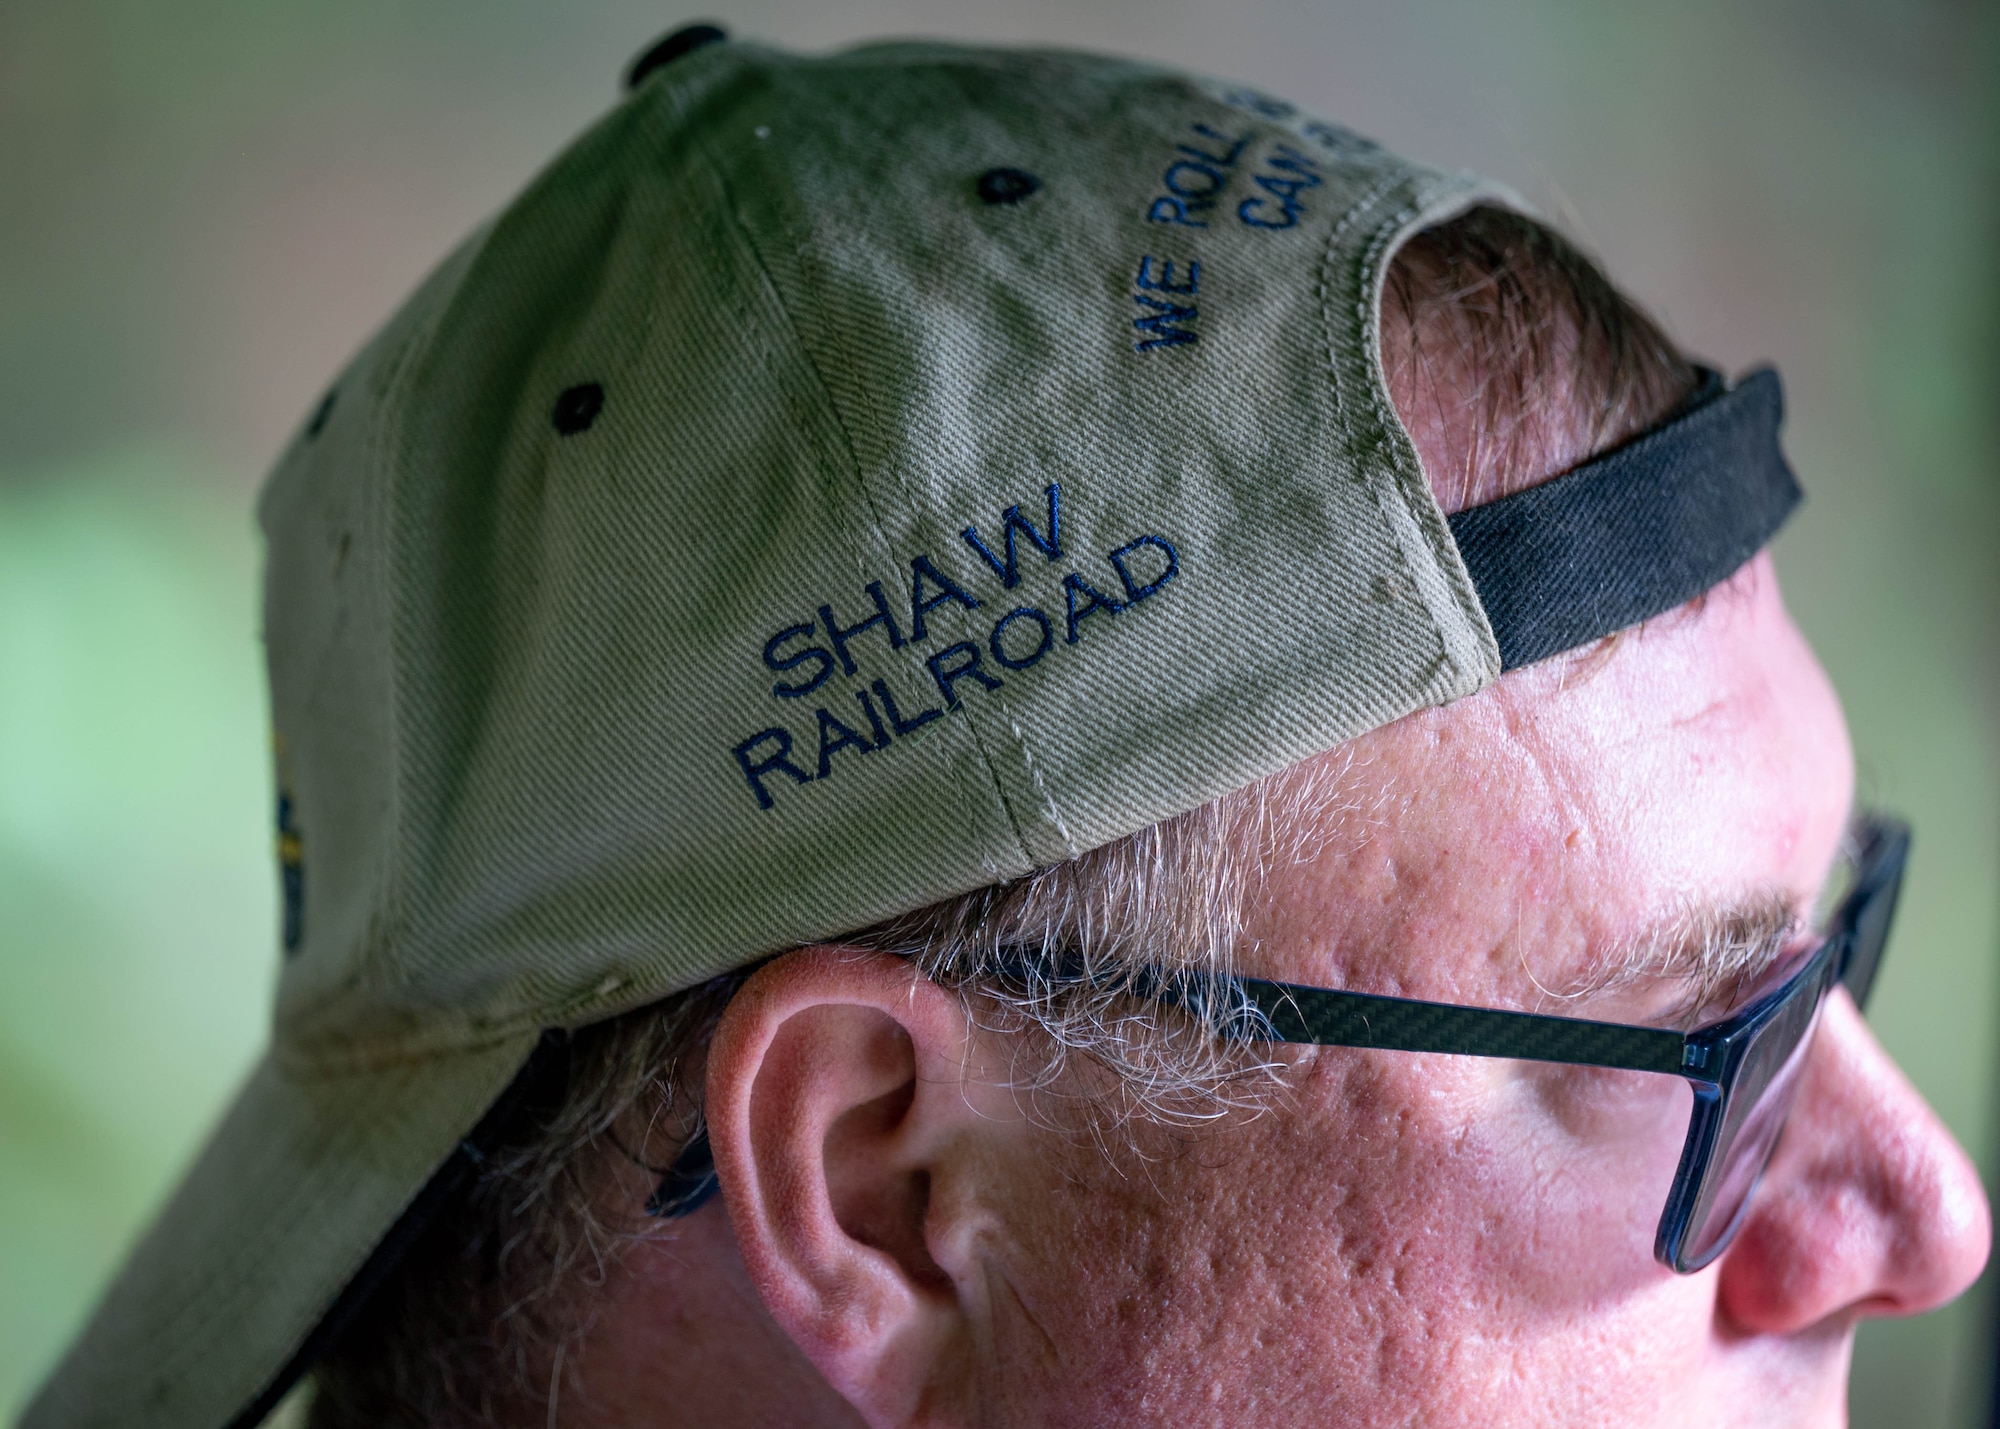 Man wearing a customized hat with the words "Shaw Railroad" embroidered.